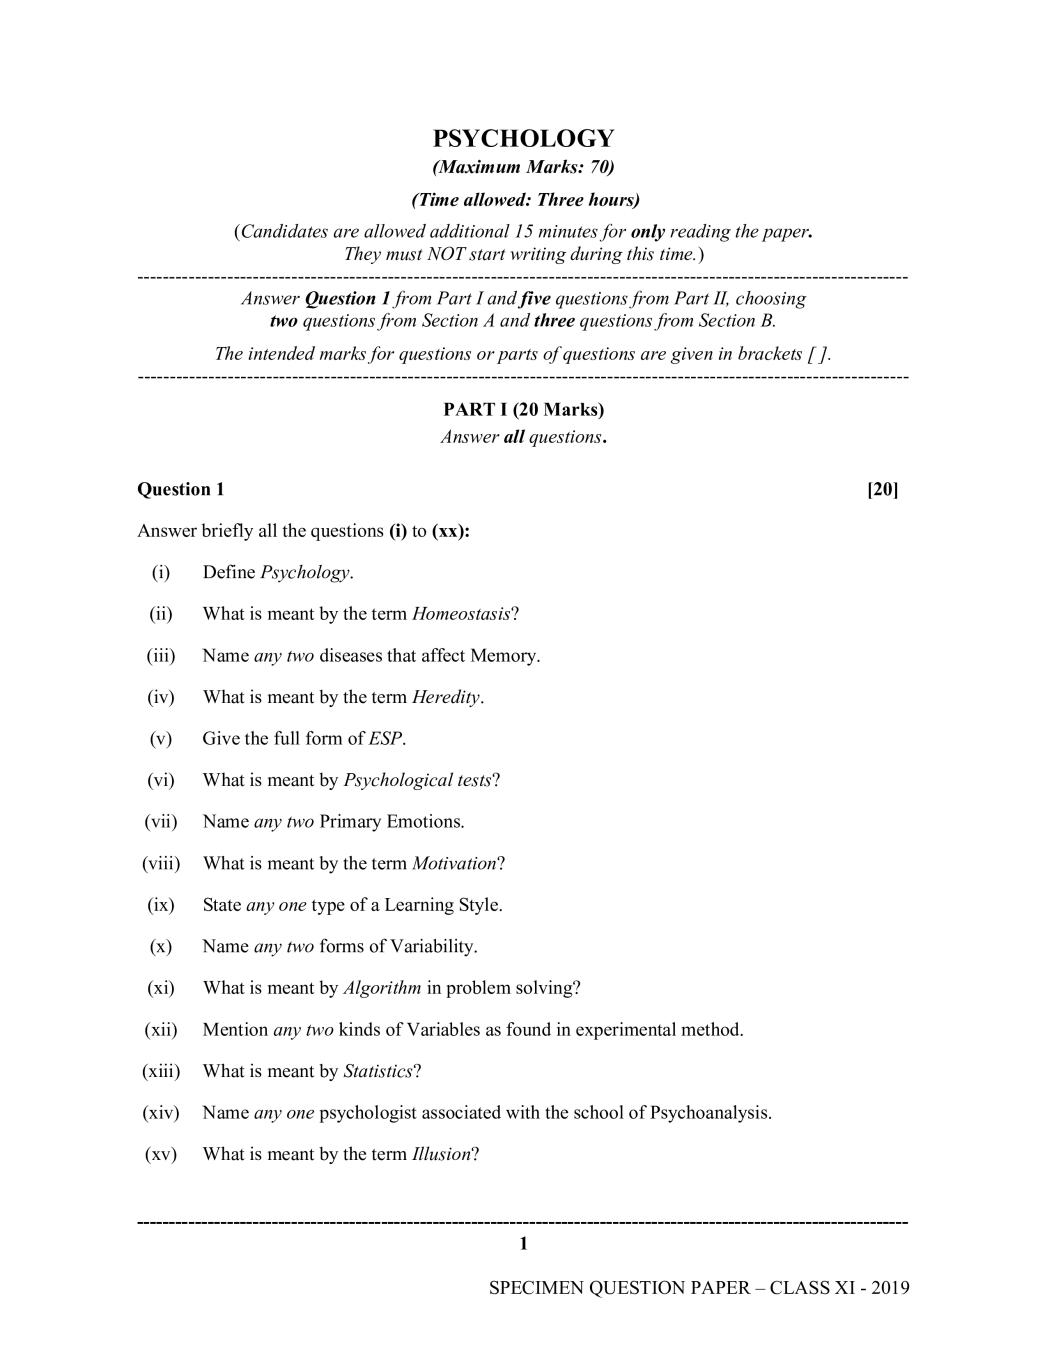 ISC Class 11 Specimen Paper for Psychology - Page 1